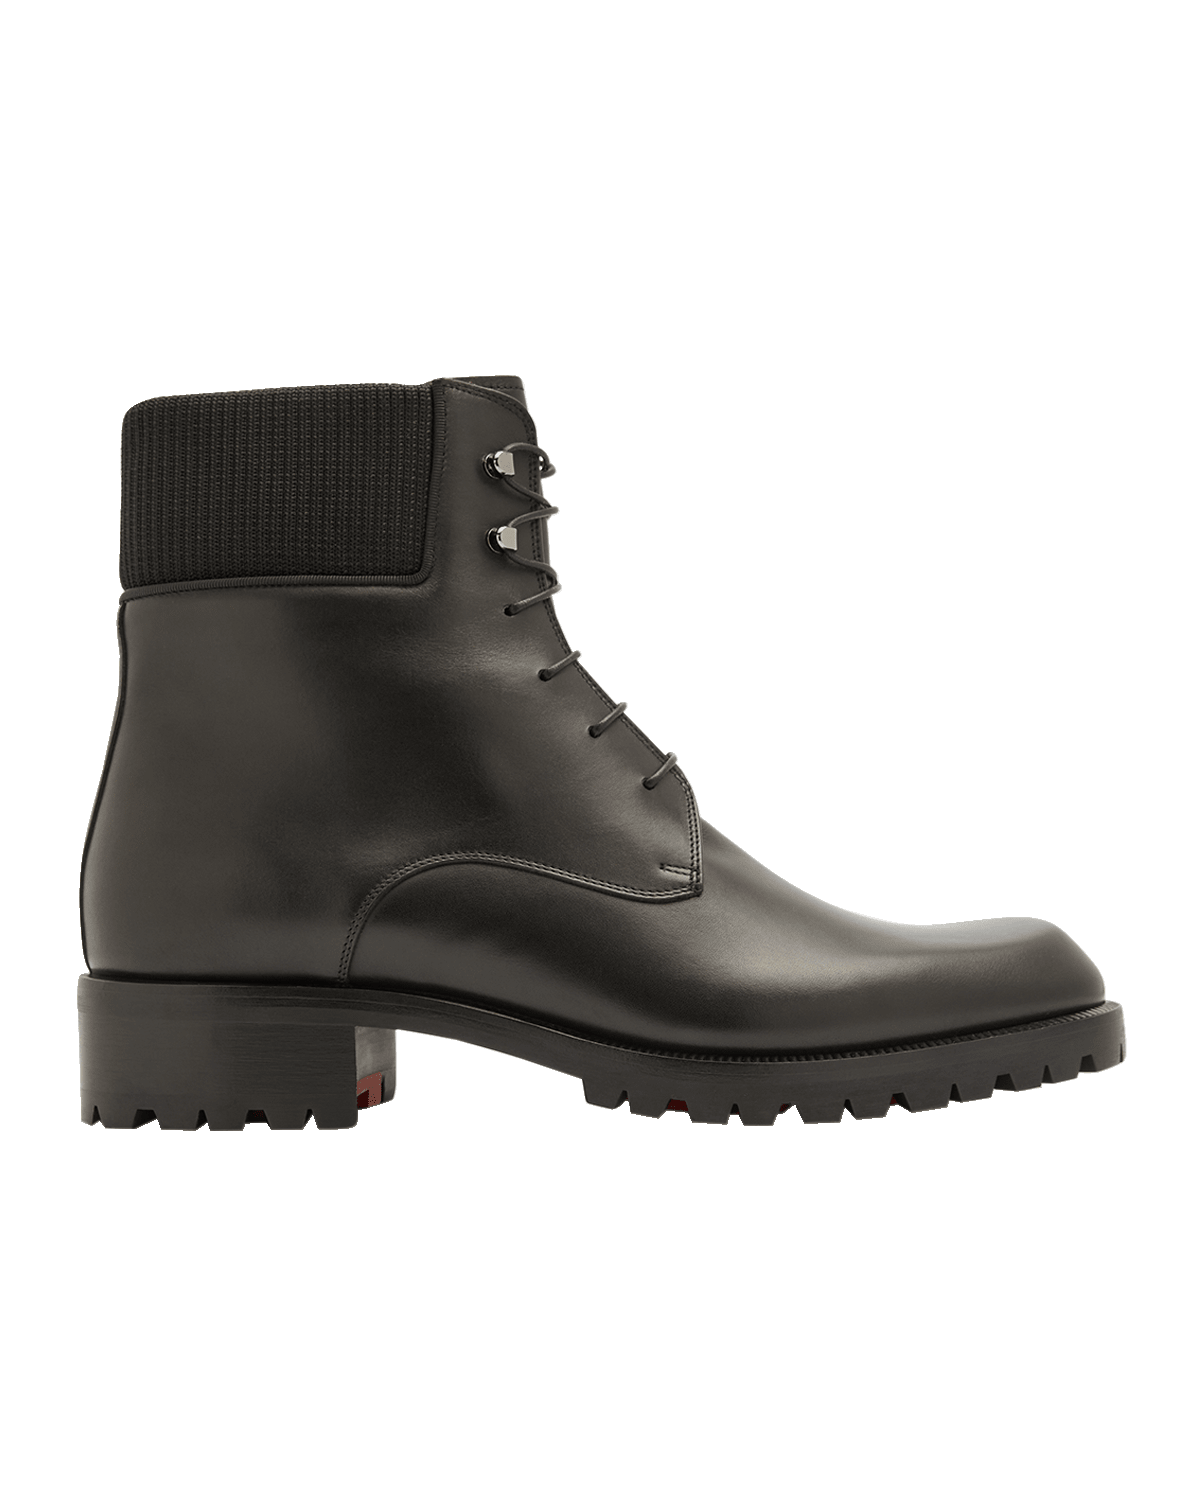 Off-White Men's Sole Leather Zip Military Boot | Neiman Marcus